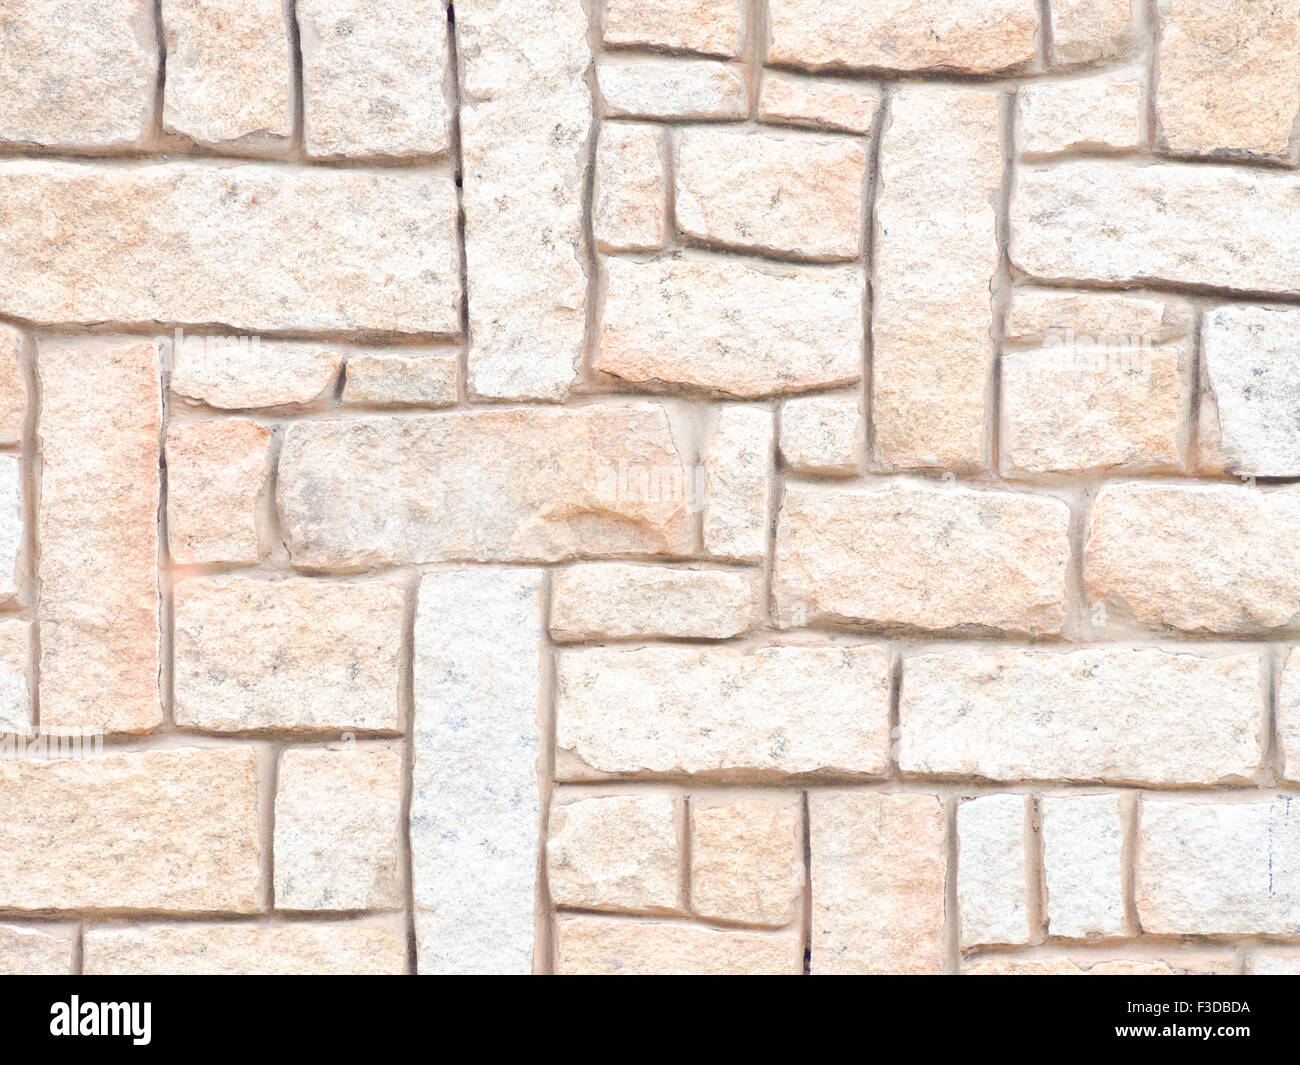 Basalt blocks lined. Close up of a wall of stone. Stock Photo